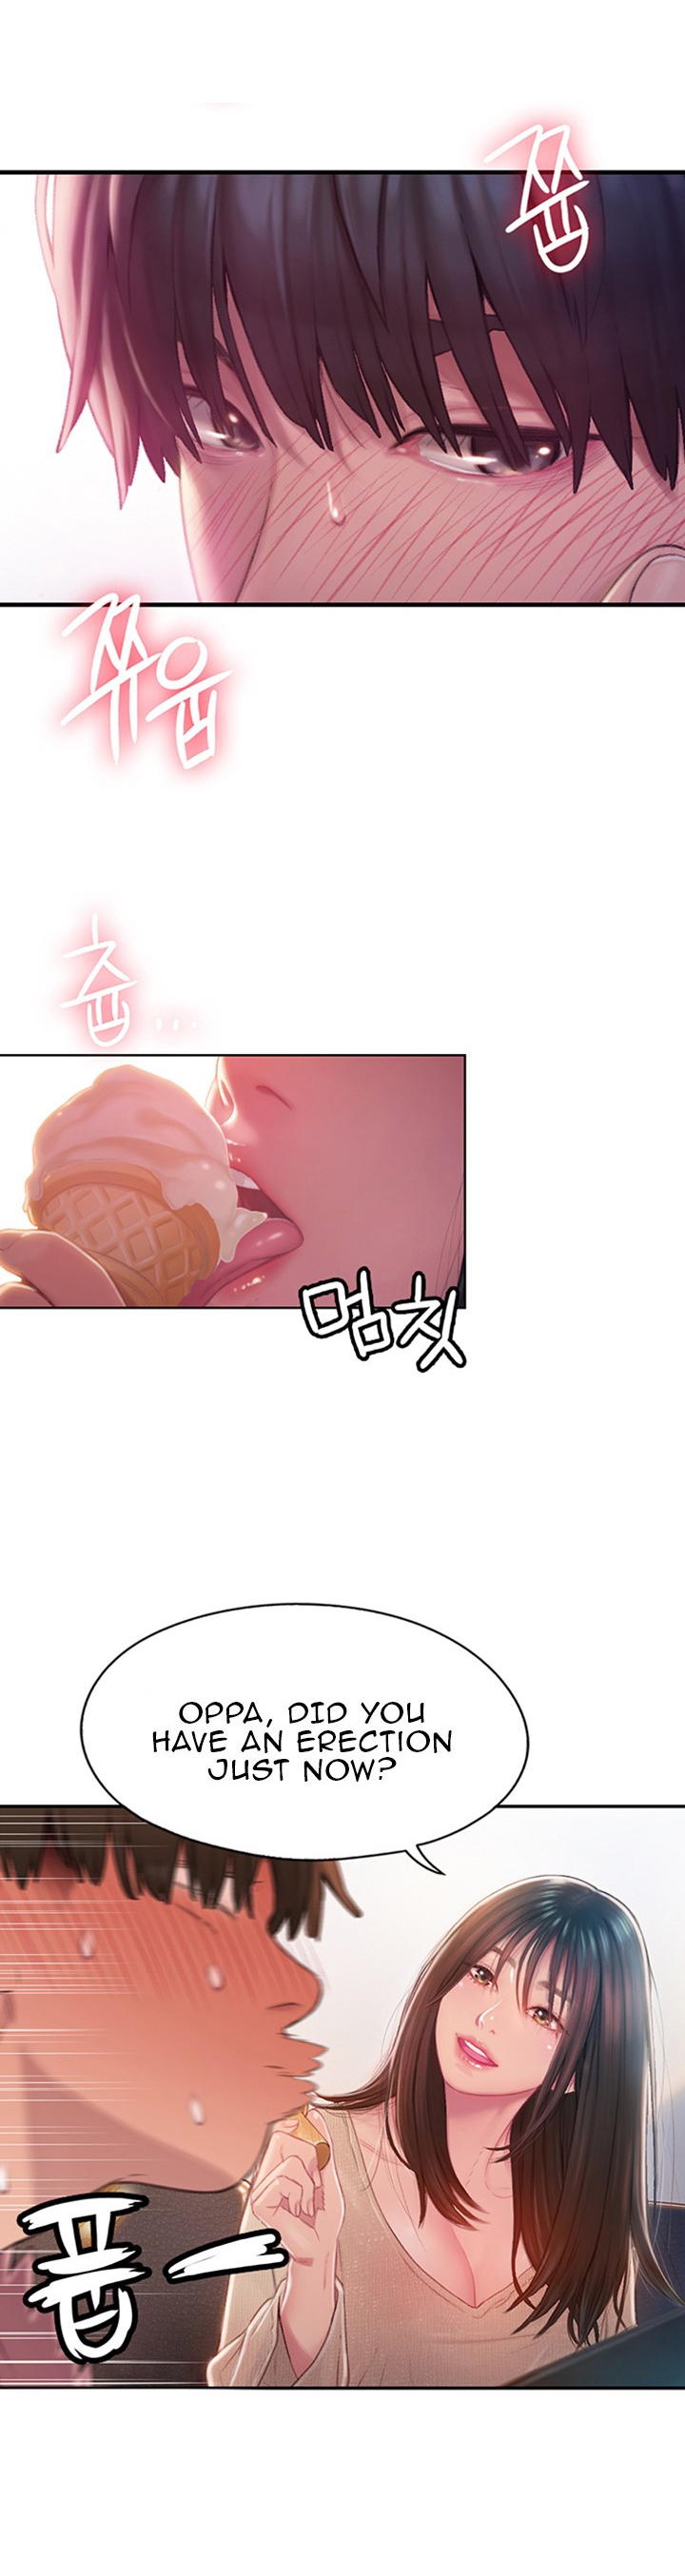 [Park Hyeongjun] Love Limit Exceeded (01-28) Ongoing - Page 4